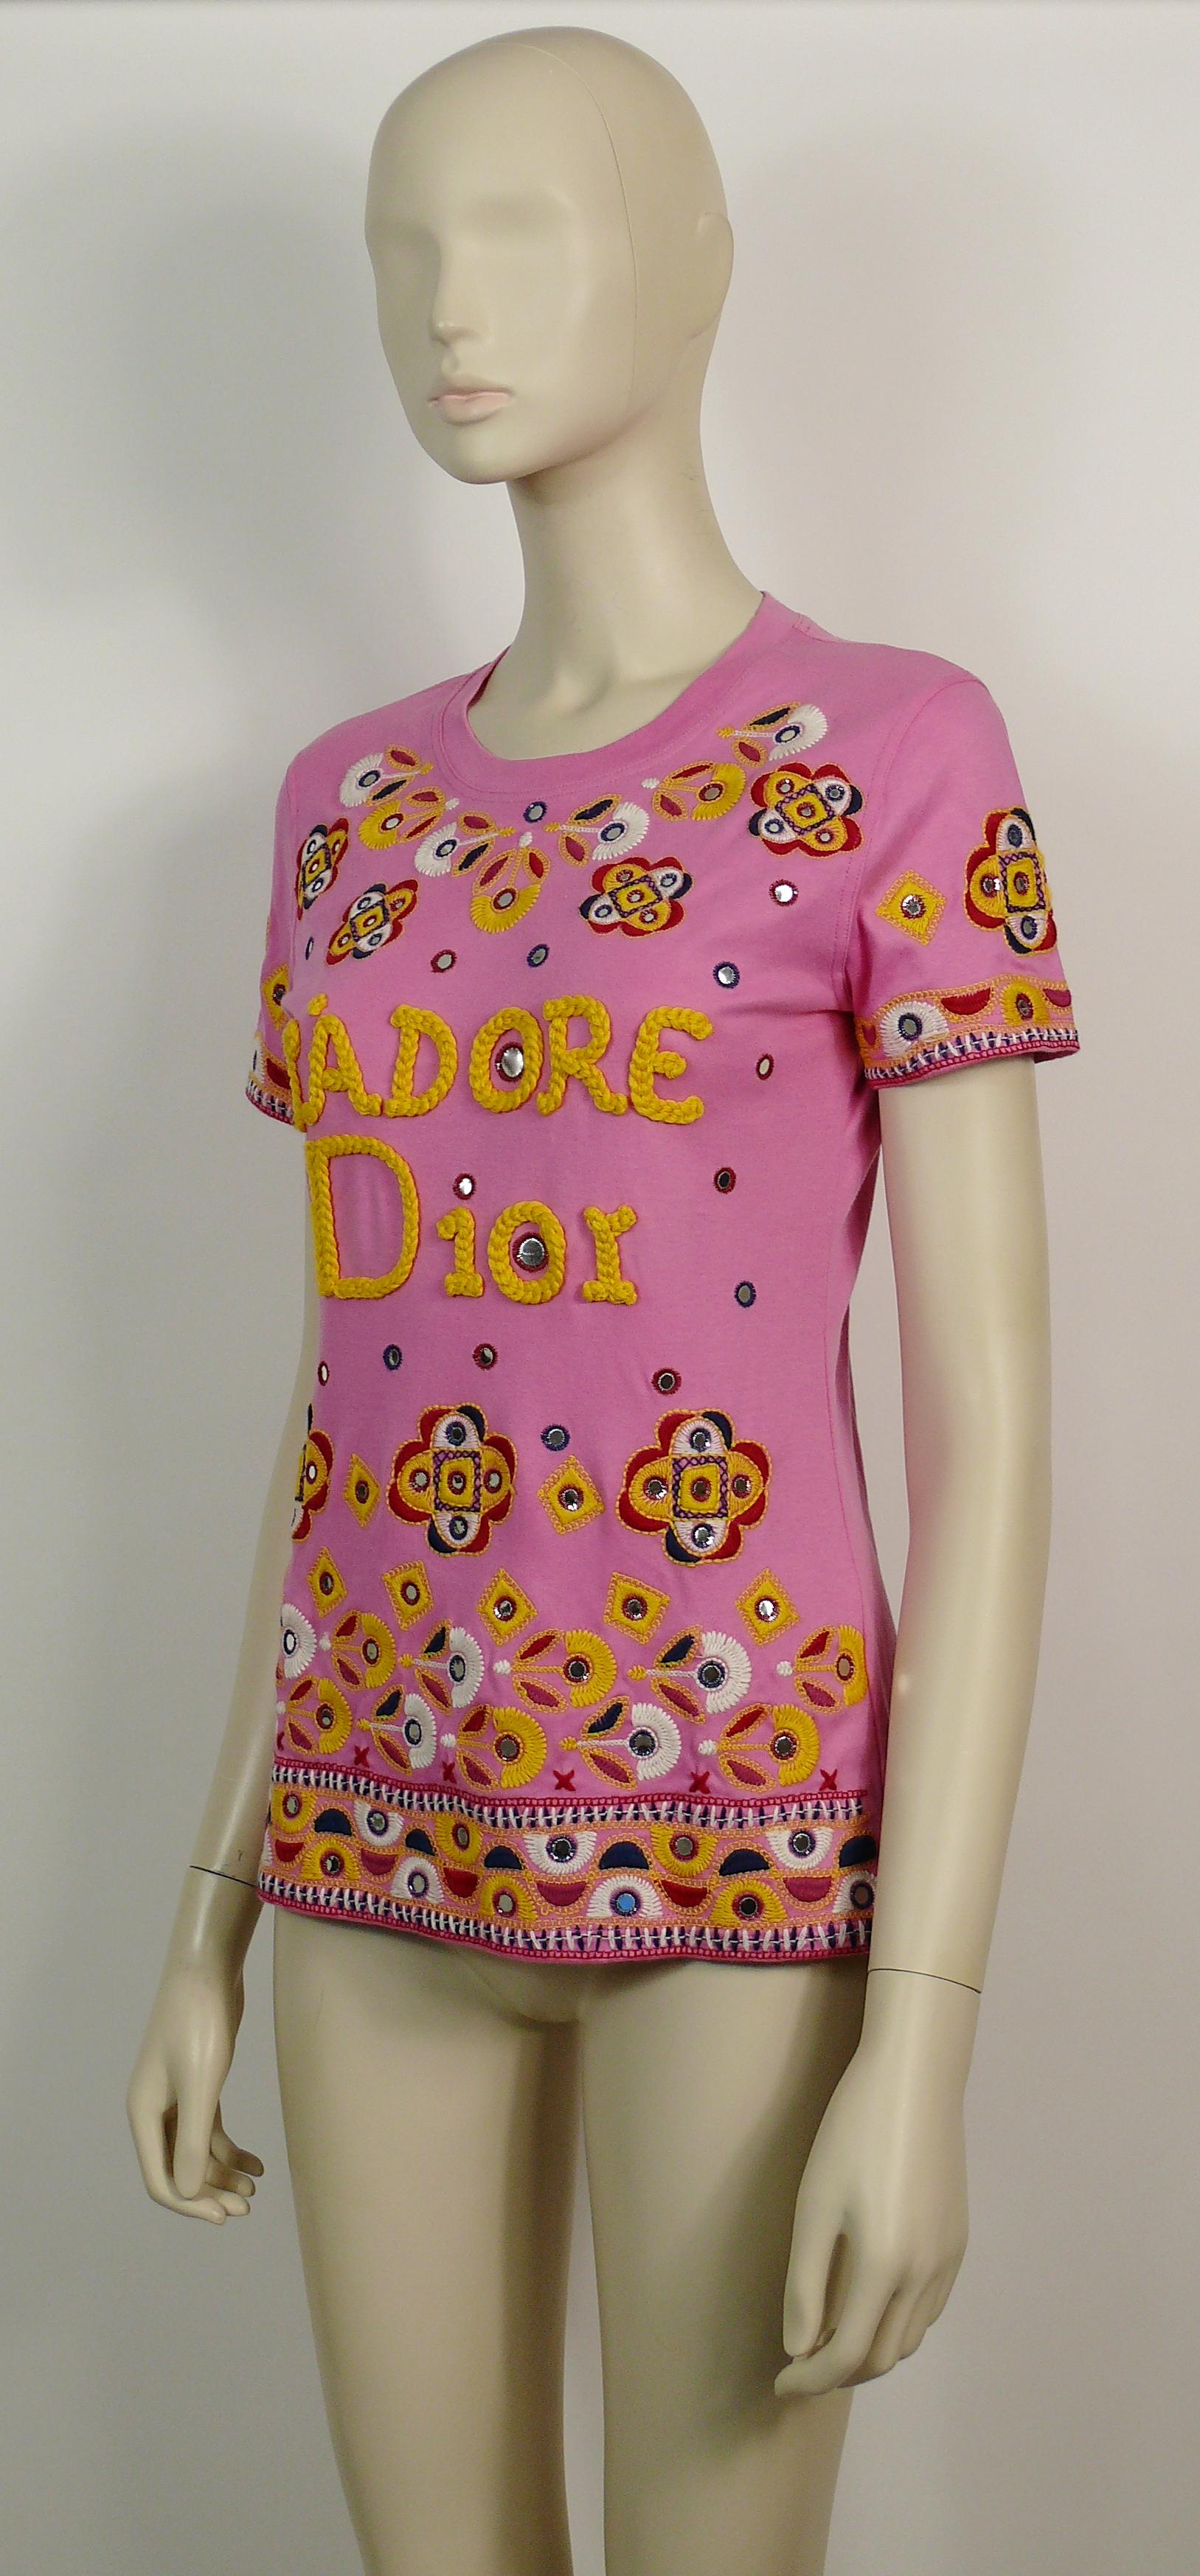 Pink Christian Dior J'adore Dior Embroidered T-Shirt US Size 6